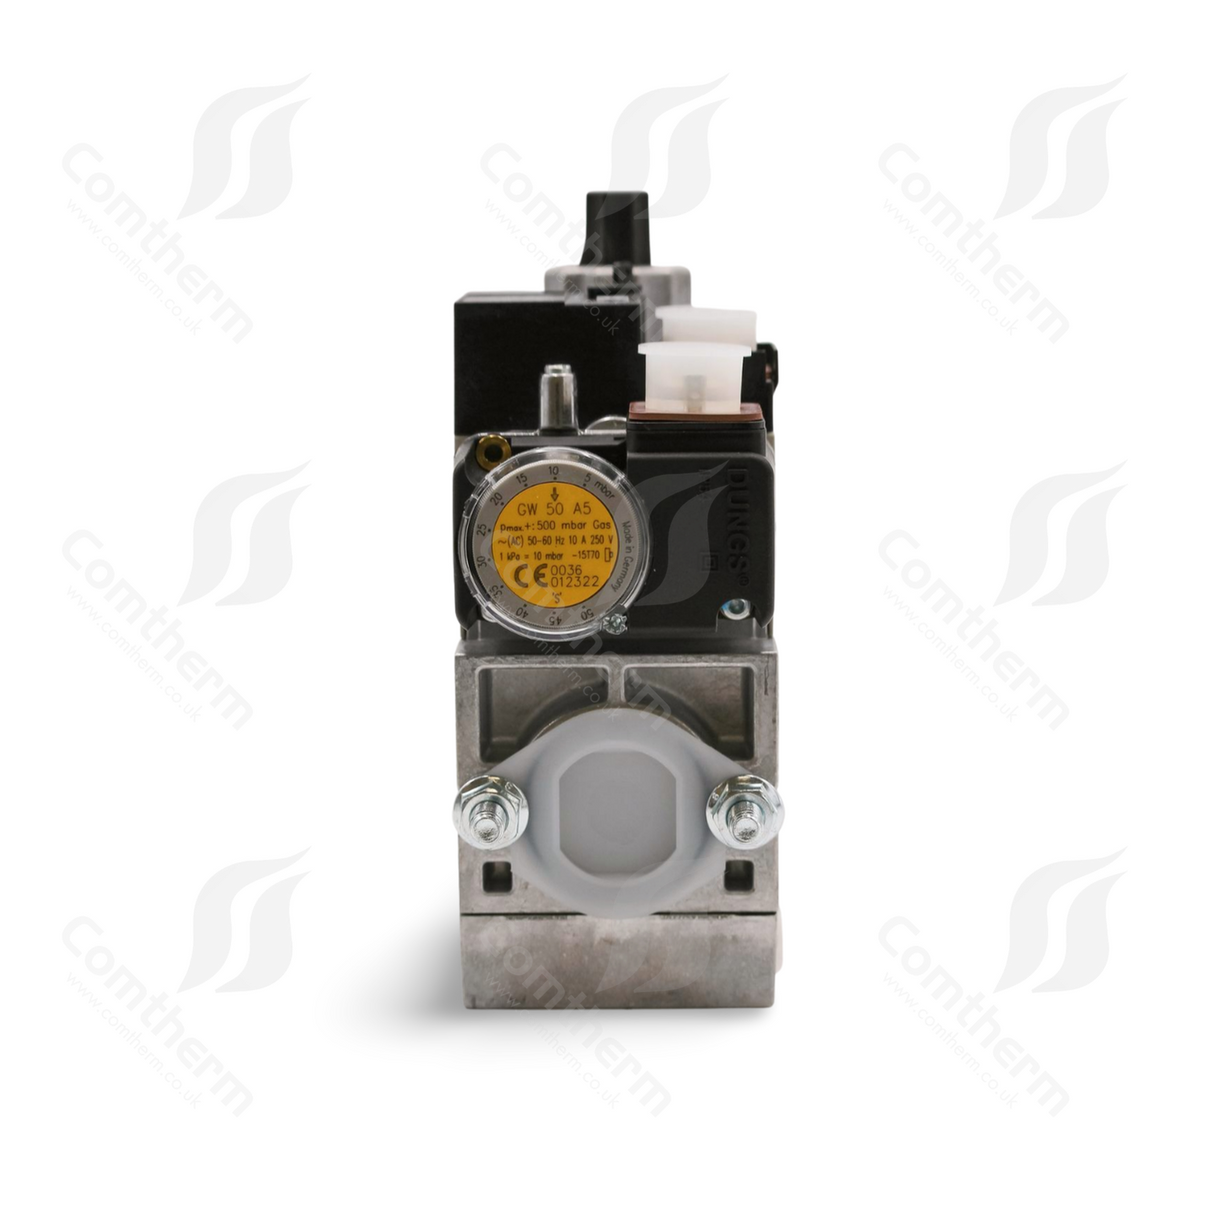 Dungs MB-DLE 410 B01 S22 + GW150A5 Multibloc Gas Valve - 230v